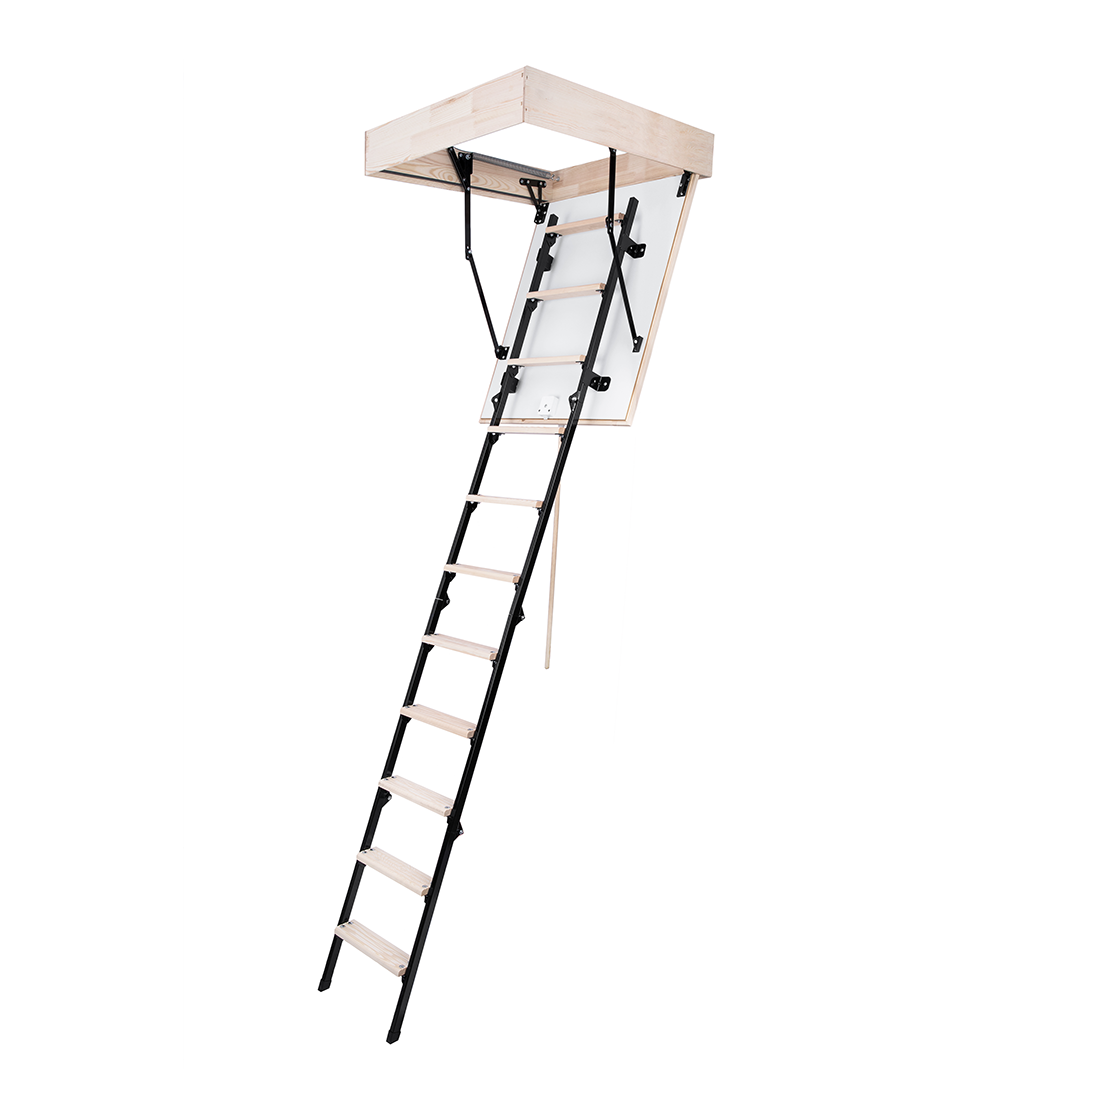 STAIRLUXE Uni Metal-Wooden Attic Ladder, 31.5 in x 23.5 in, Size: 31.5 x 23.5, Black